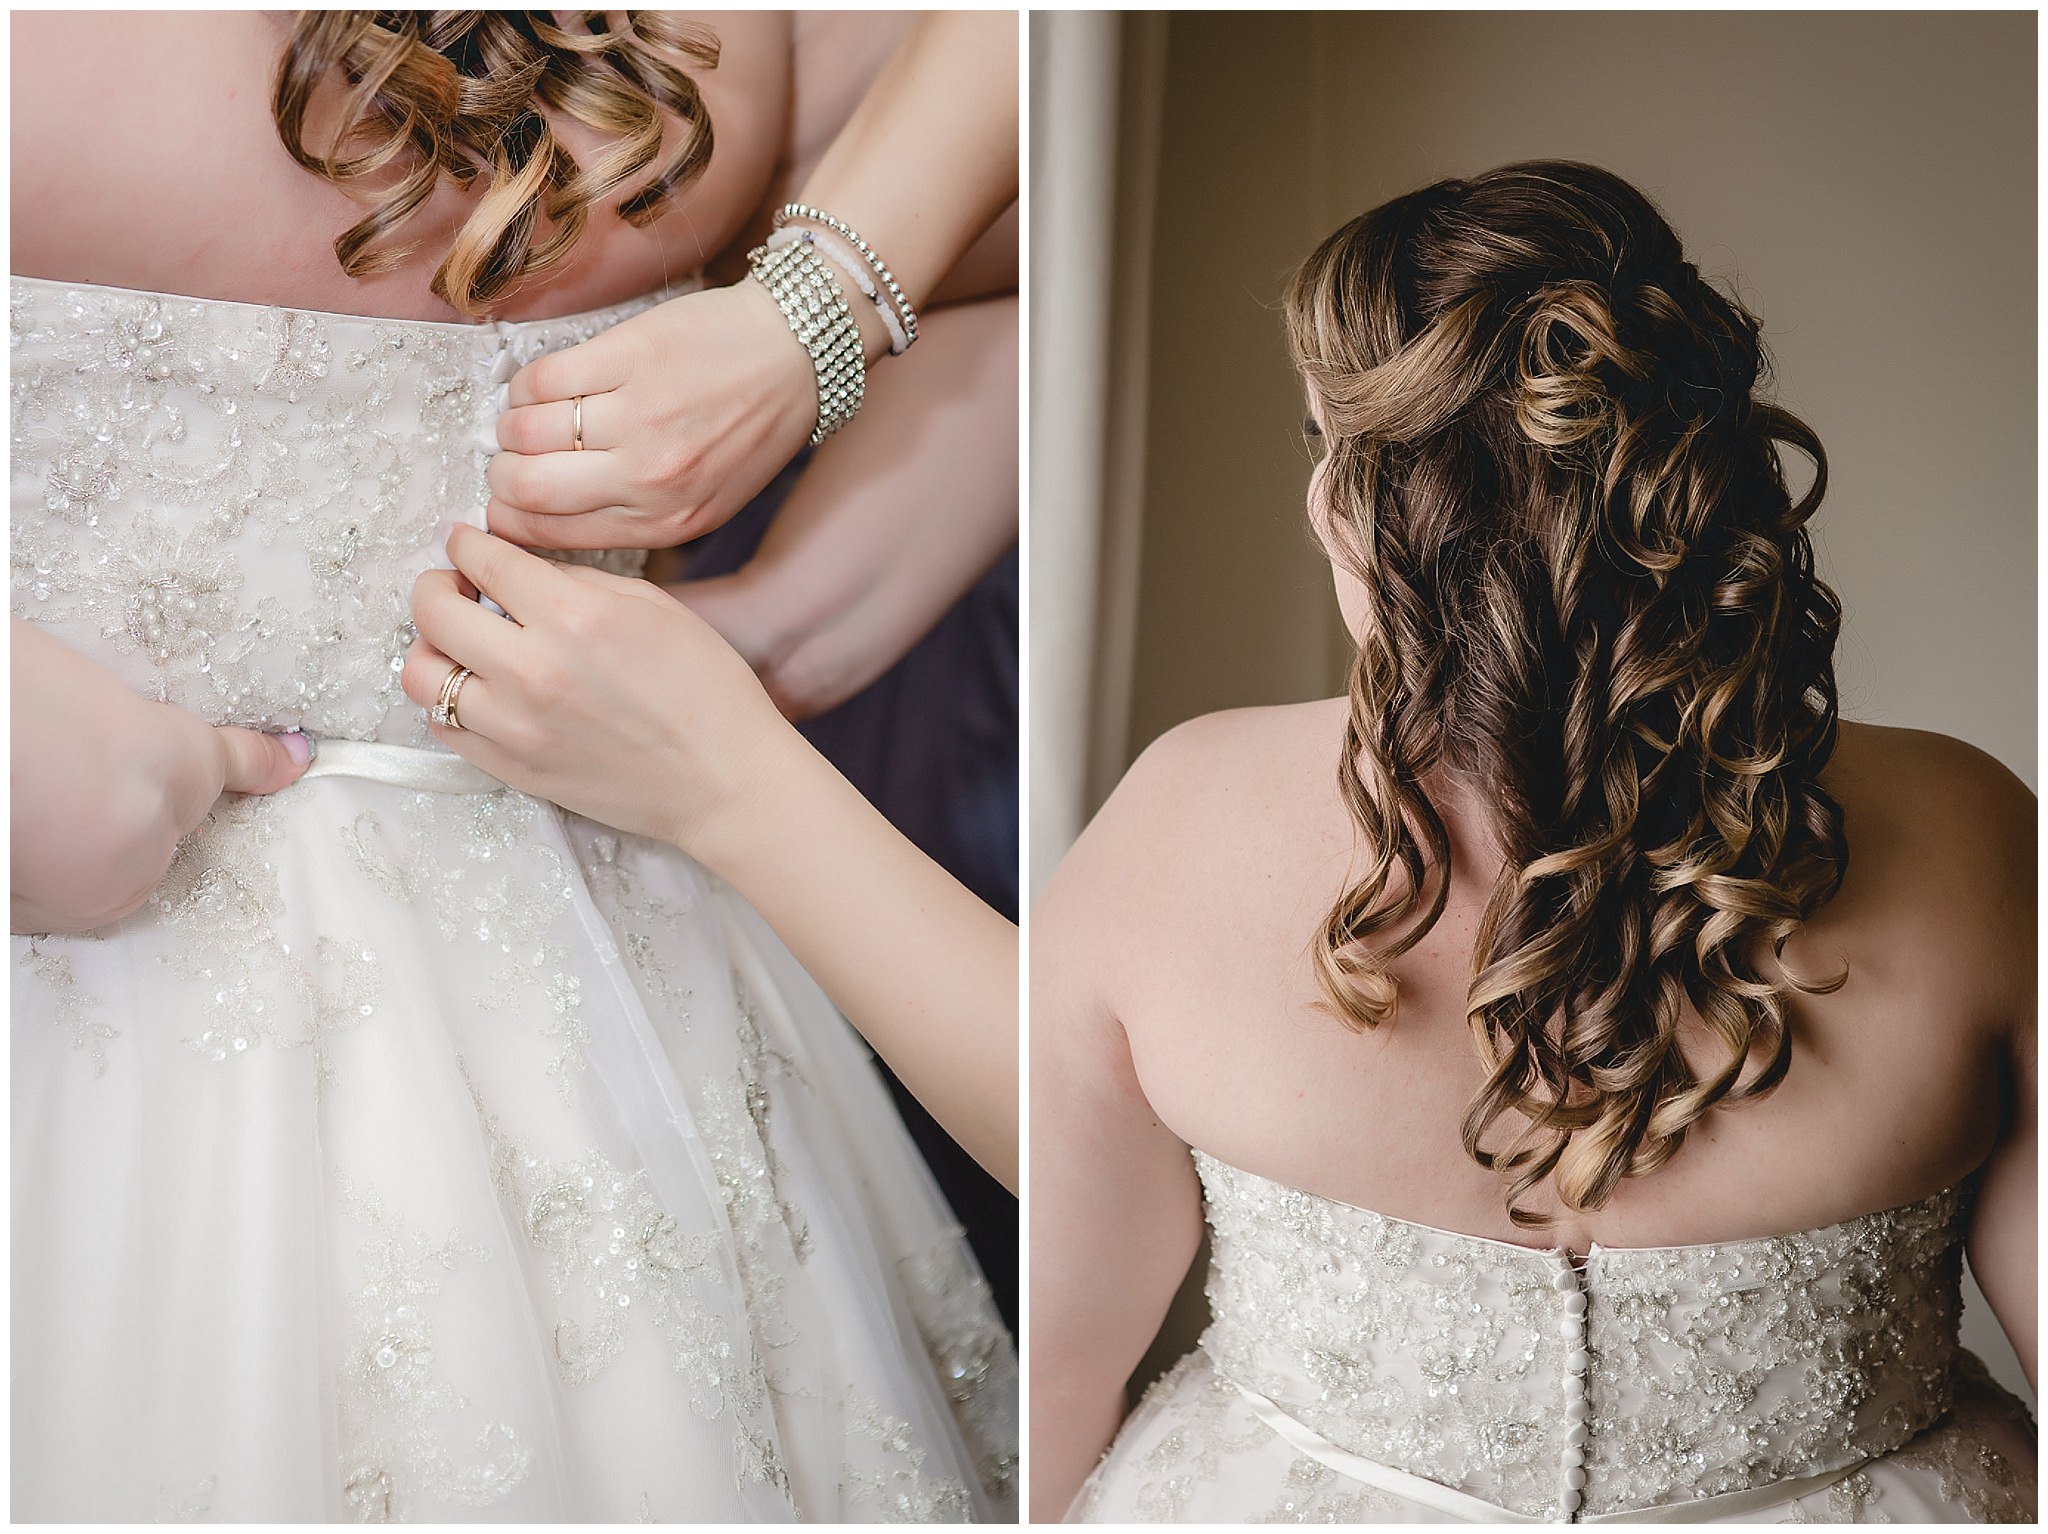 Bridal hair by Brooke Rockwell Hair Design in Pittsburgh